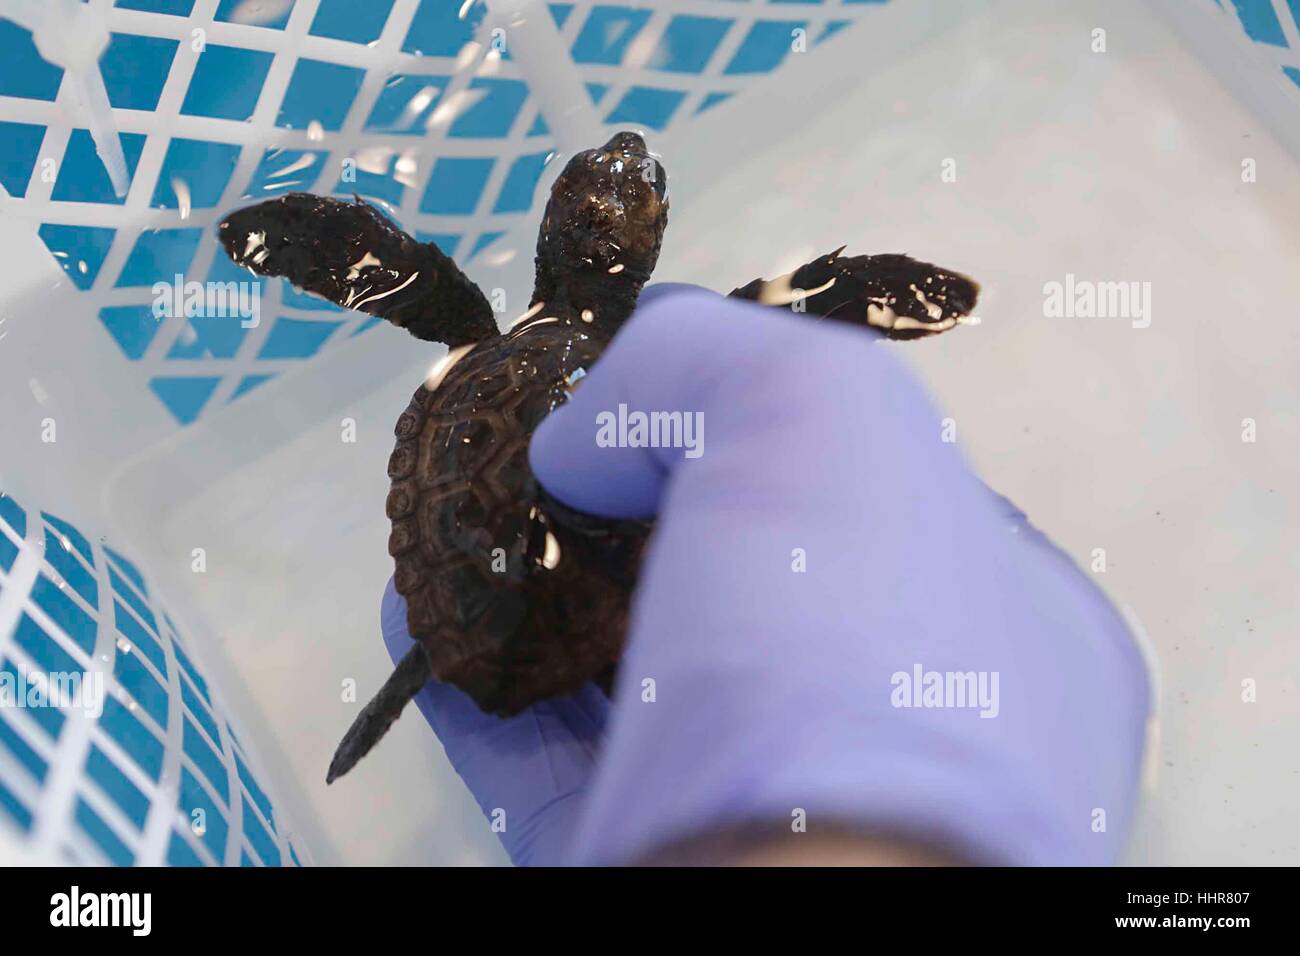 Portici, Italy. 20th Jan, 2017. Mediterranean sea turtle research centre opening. Credit: agnfoto/Alamy Live News Stock Photo